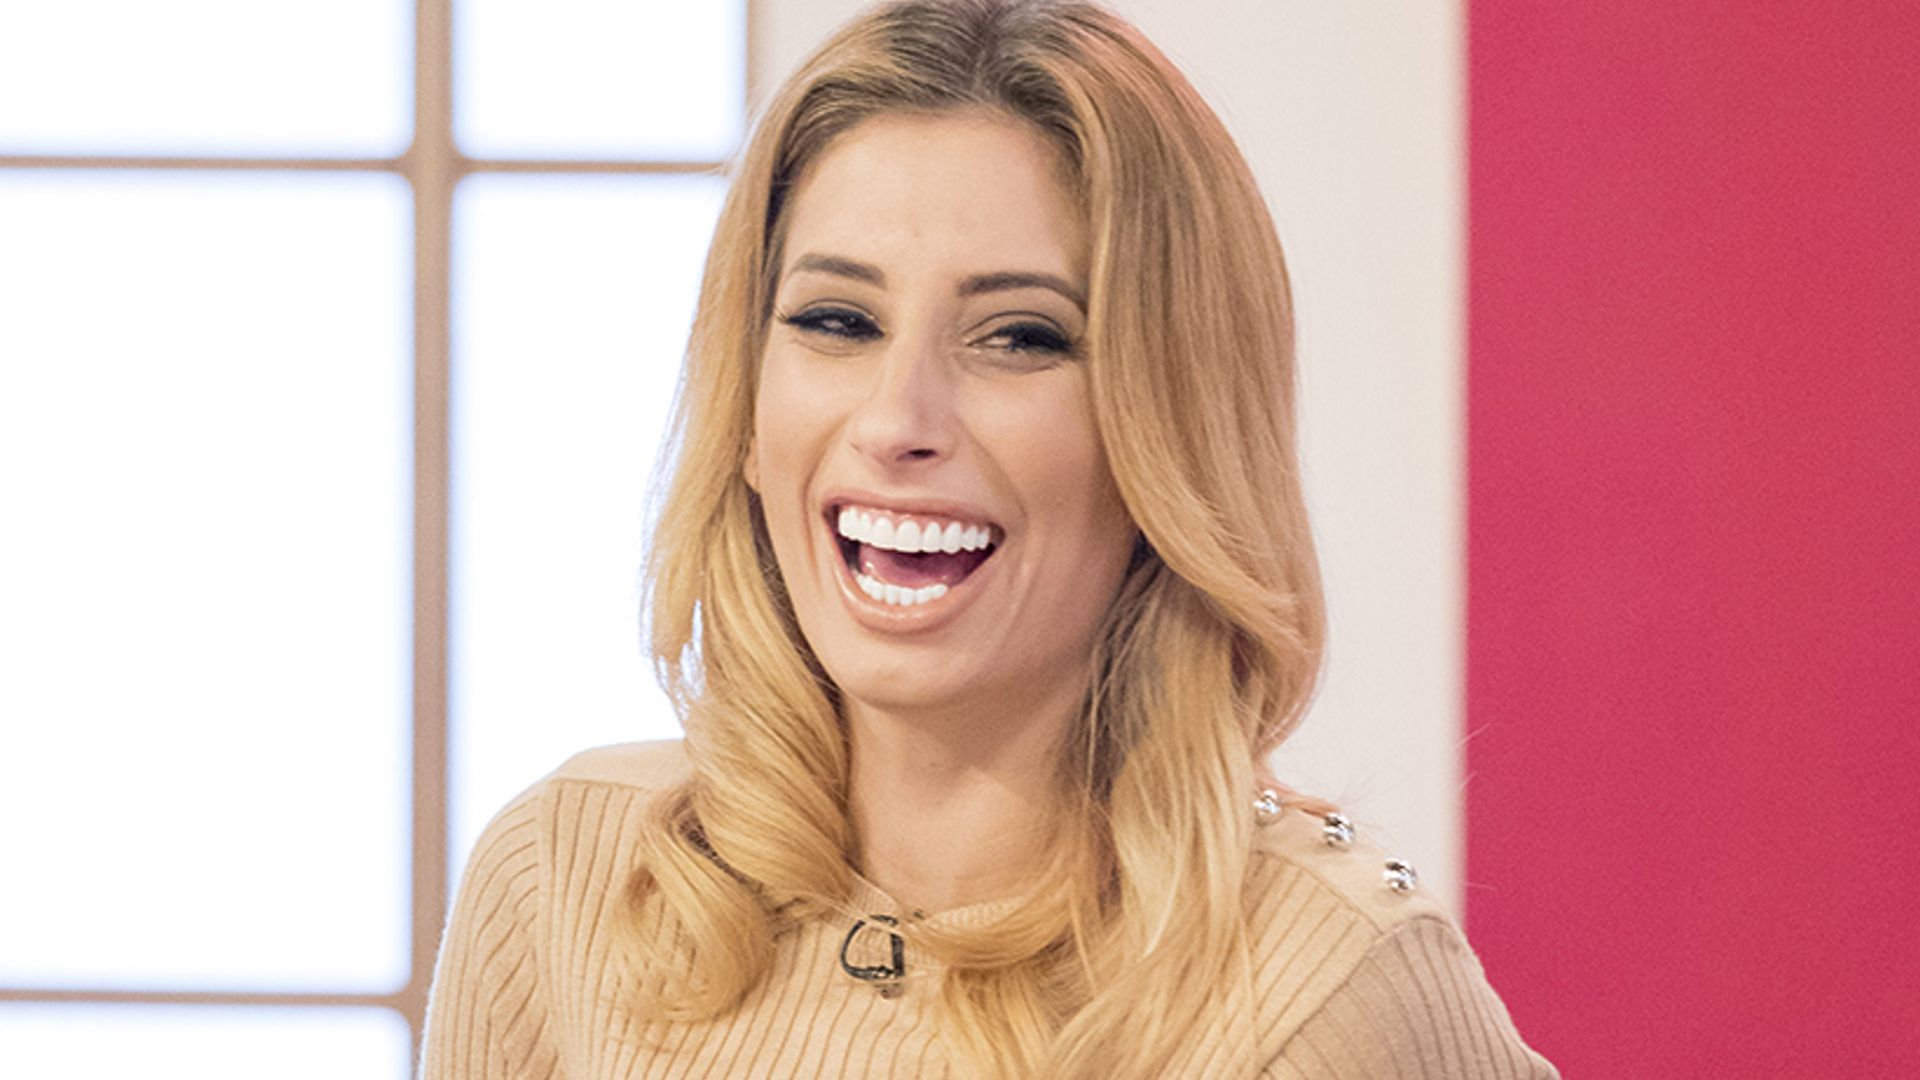 Stacey Solomon Reveals She Has Thought About Cheating Hello